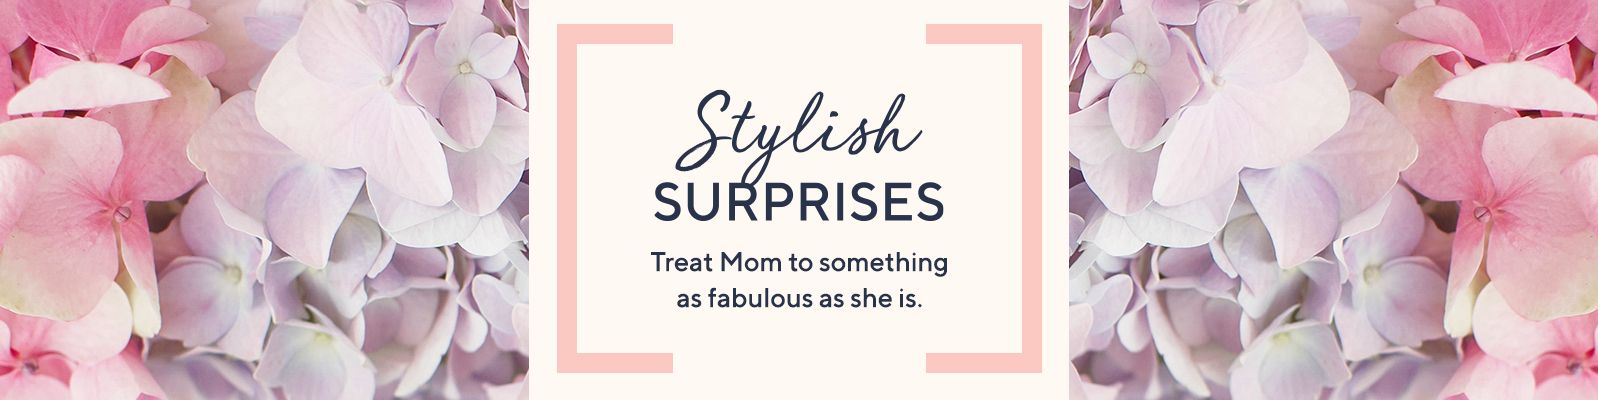 Stylish Surprises Treat Mom to something as fabulous as she is.